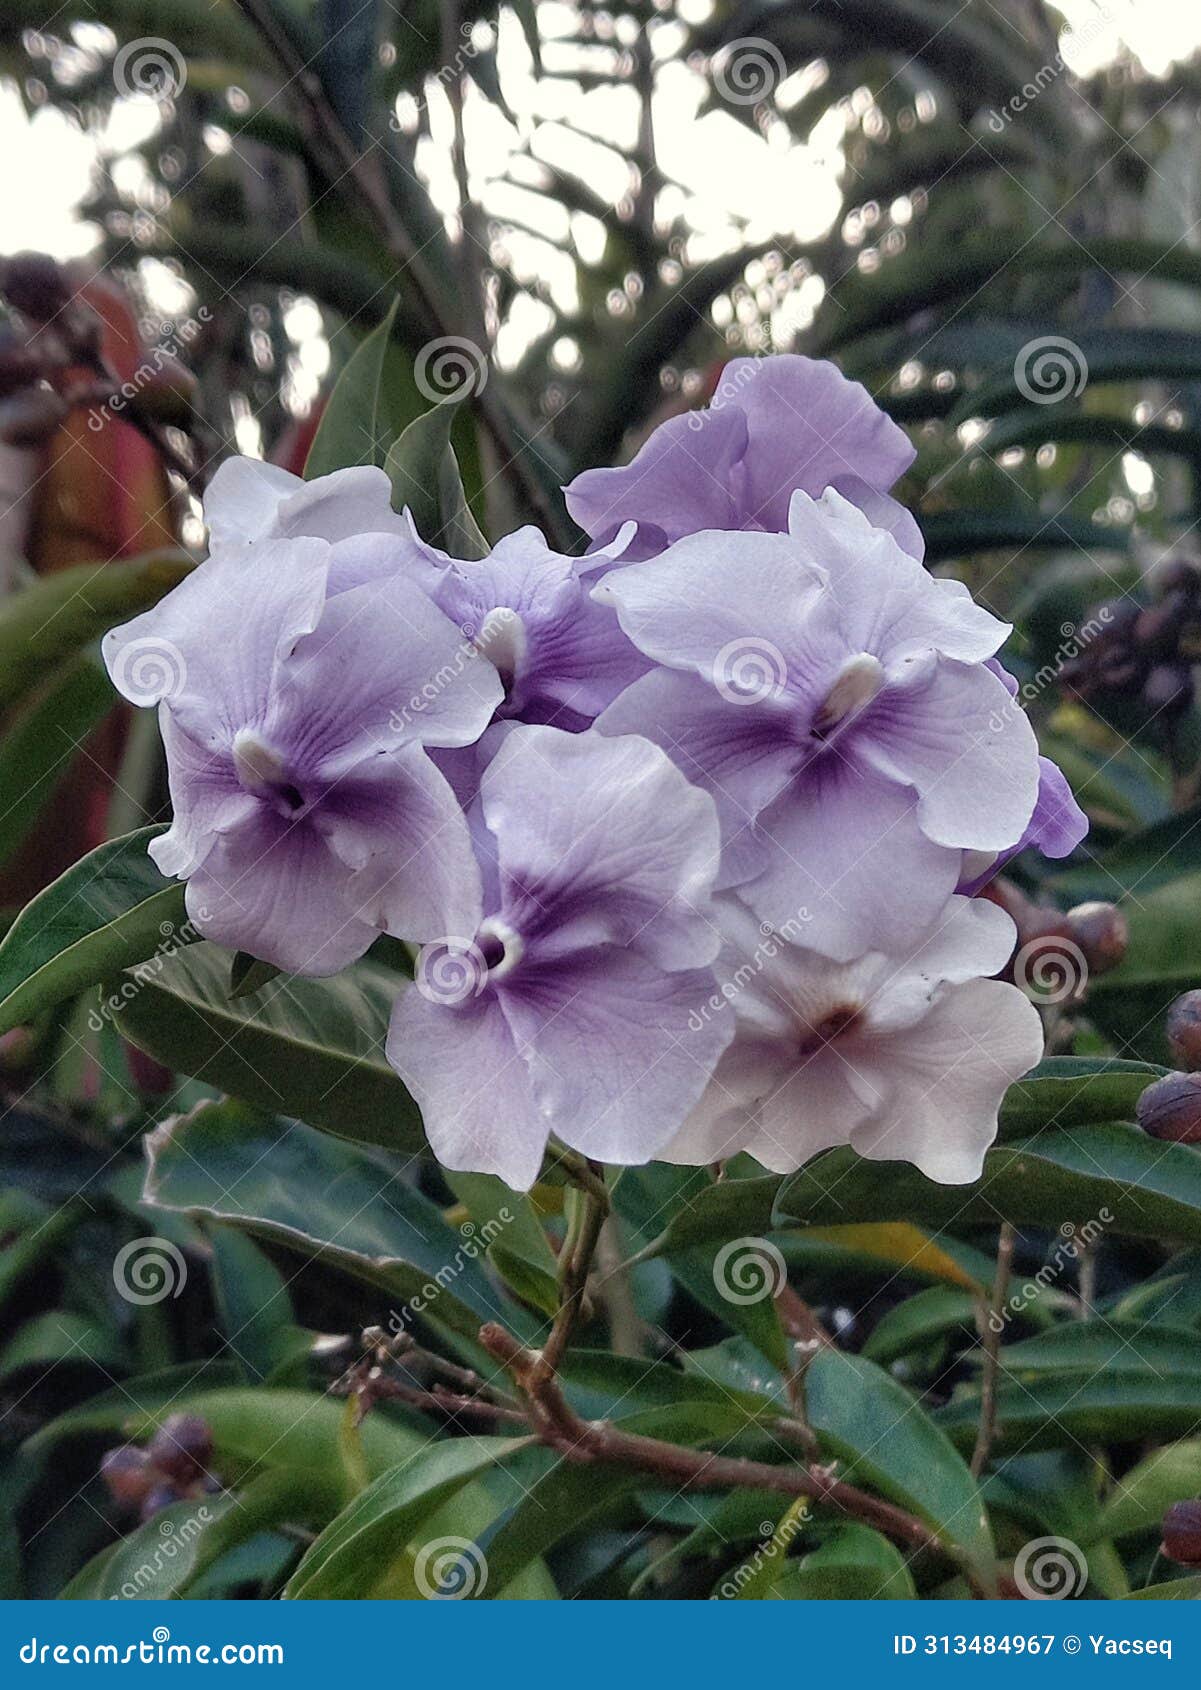 paraguayan jasmine in shades of lilac and violet